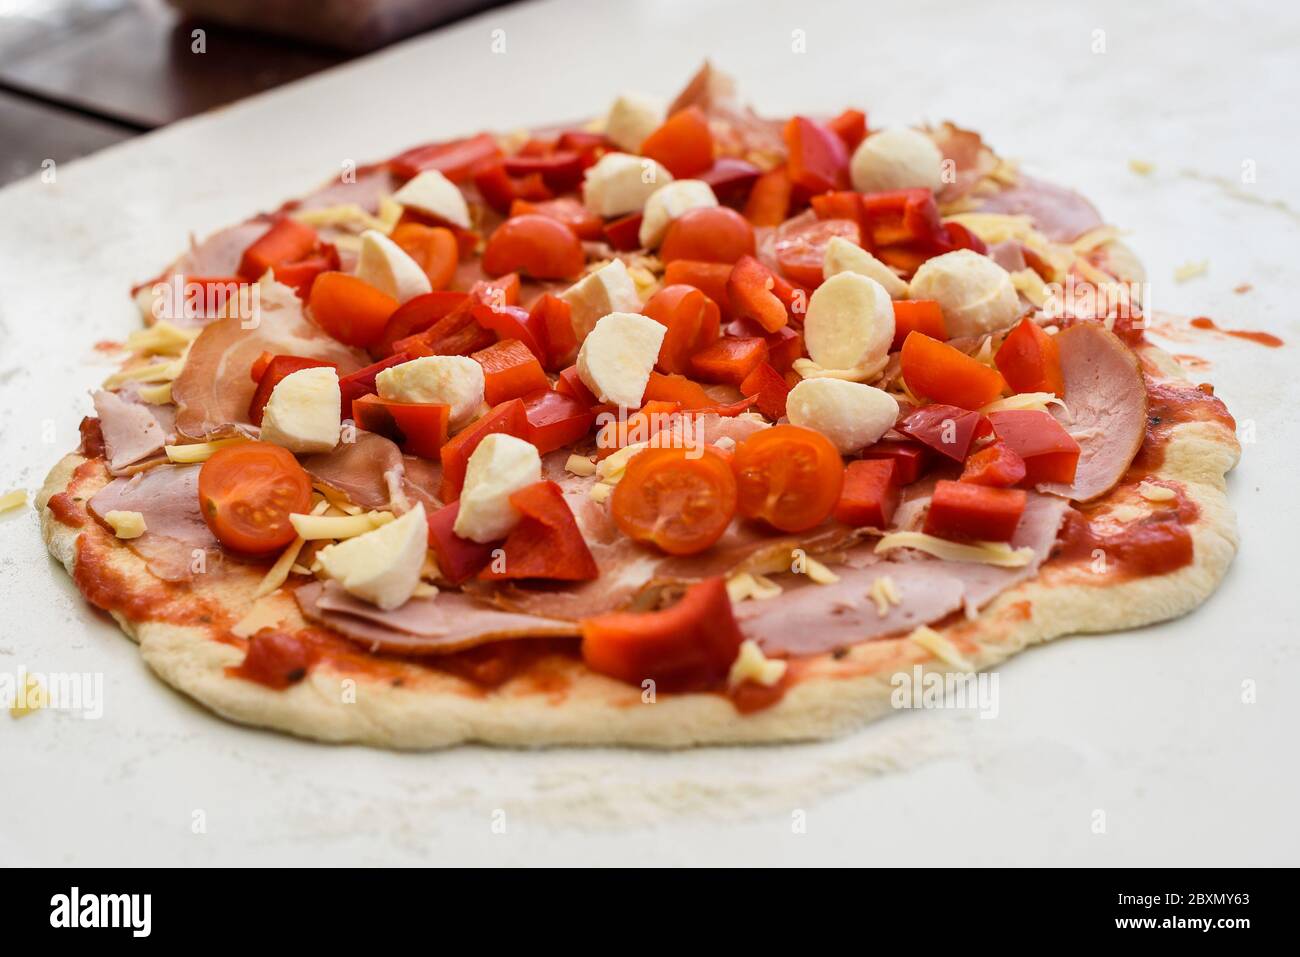 Making of homemade Italian pizza in fireplace brick oven. Making of pizza and adding different ingredients before baking it in outside fireplace. Raw Stock Photo